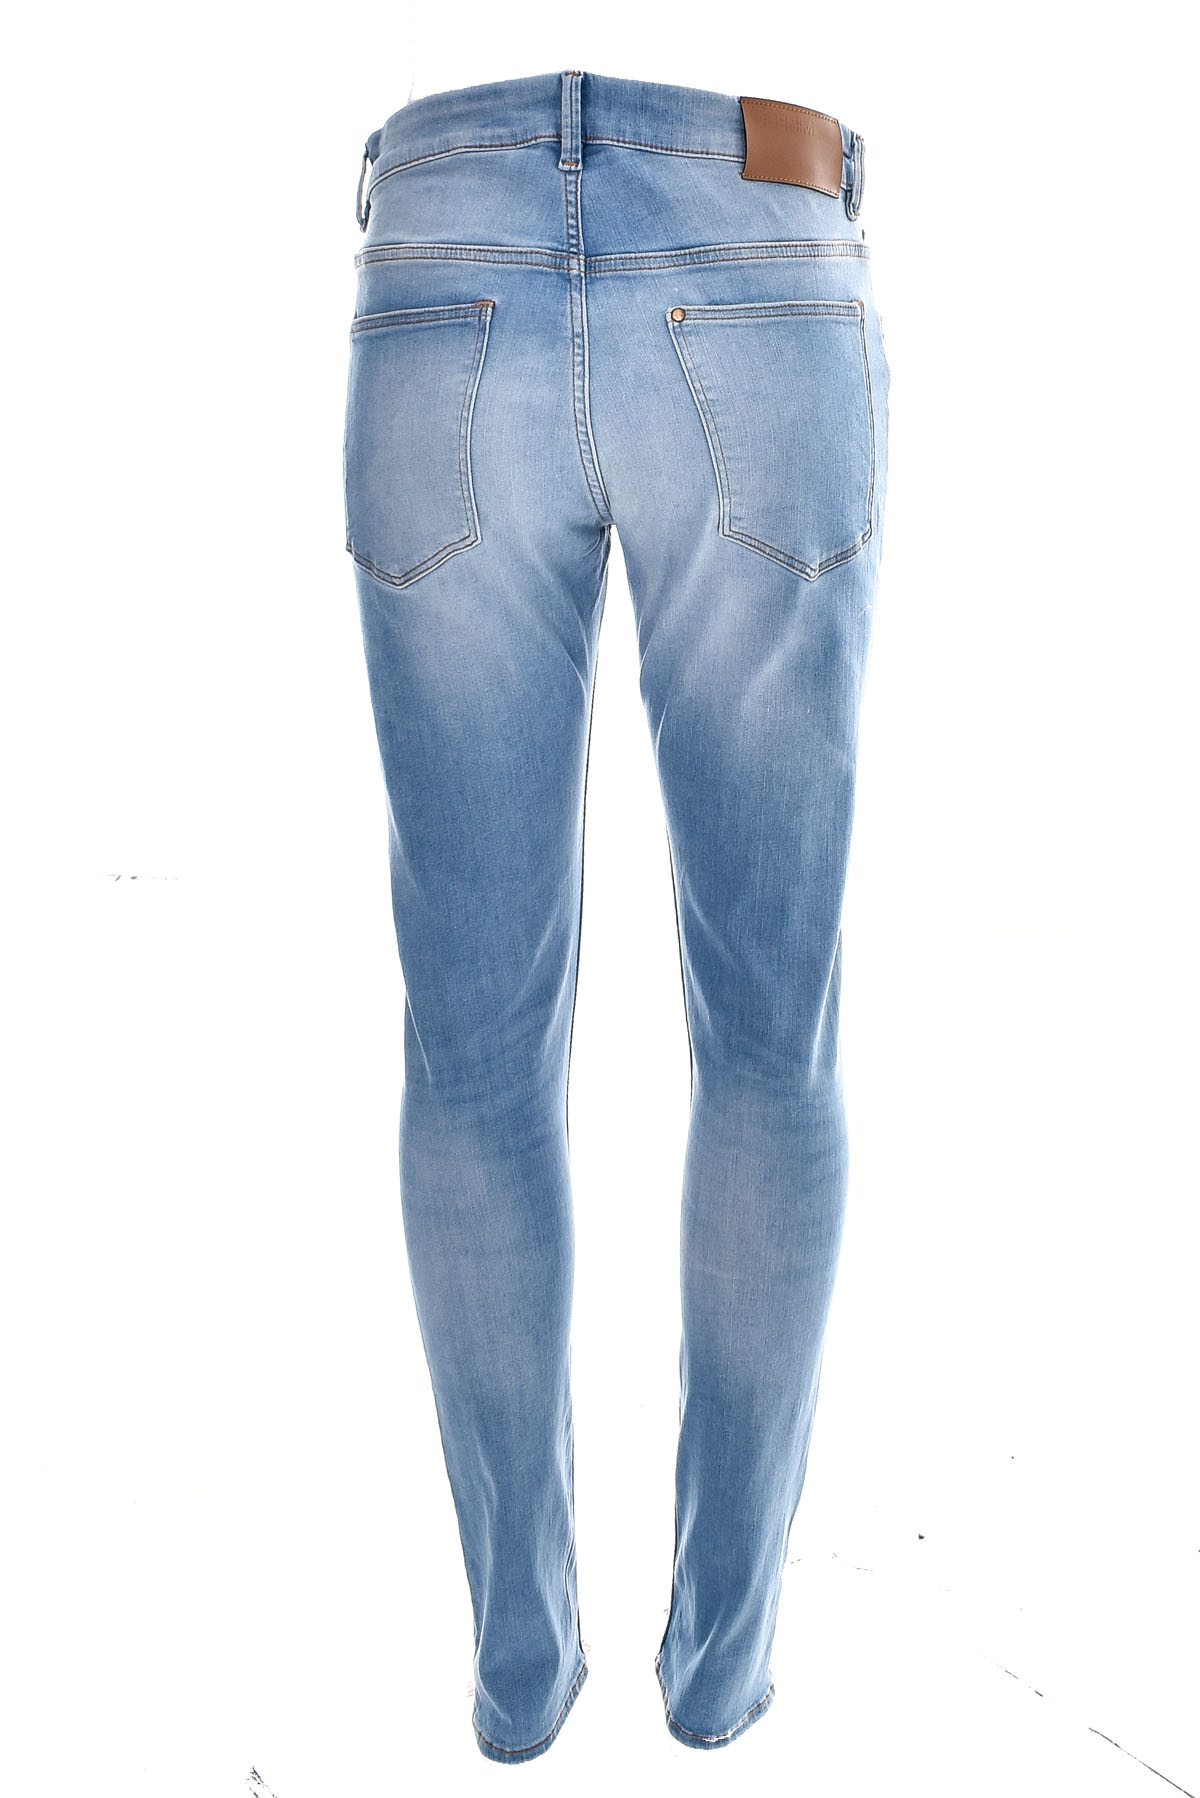 Girl's jeans - H&M - 1